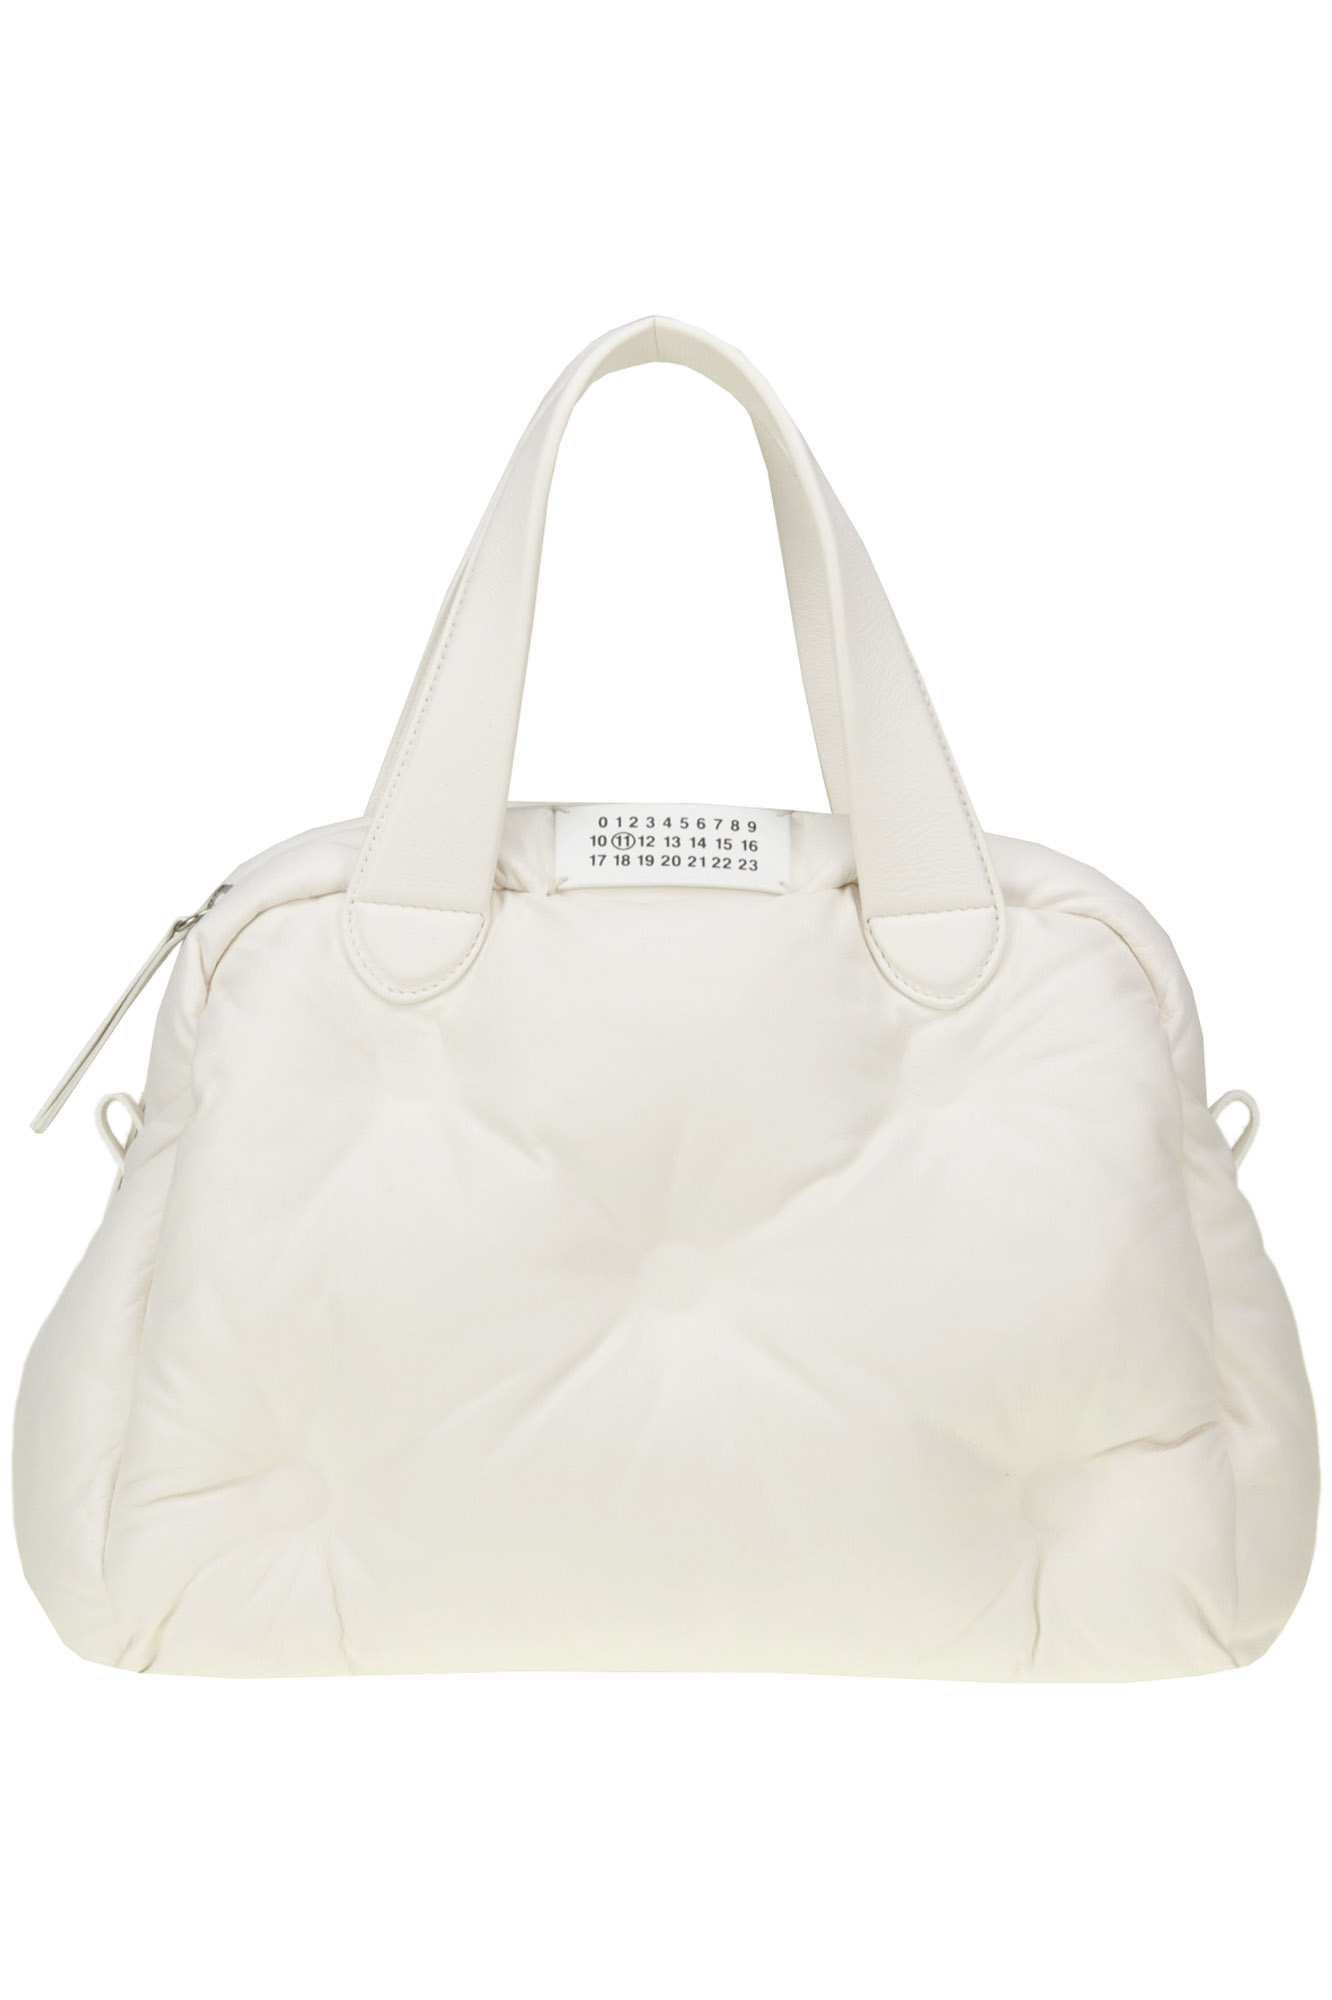 MAISON MARGIELA GLAM SLAM QUILTED LEATHER TOTE BAG